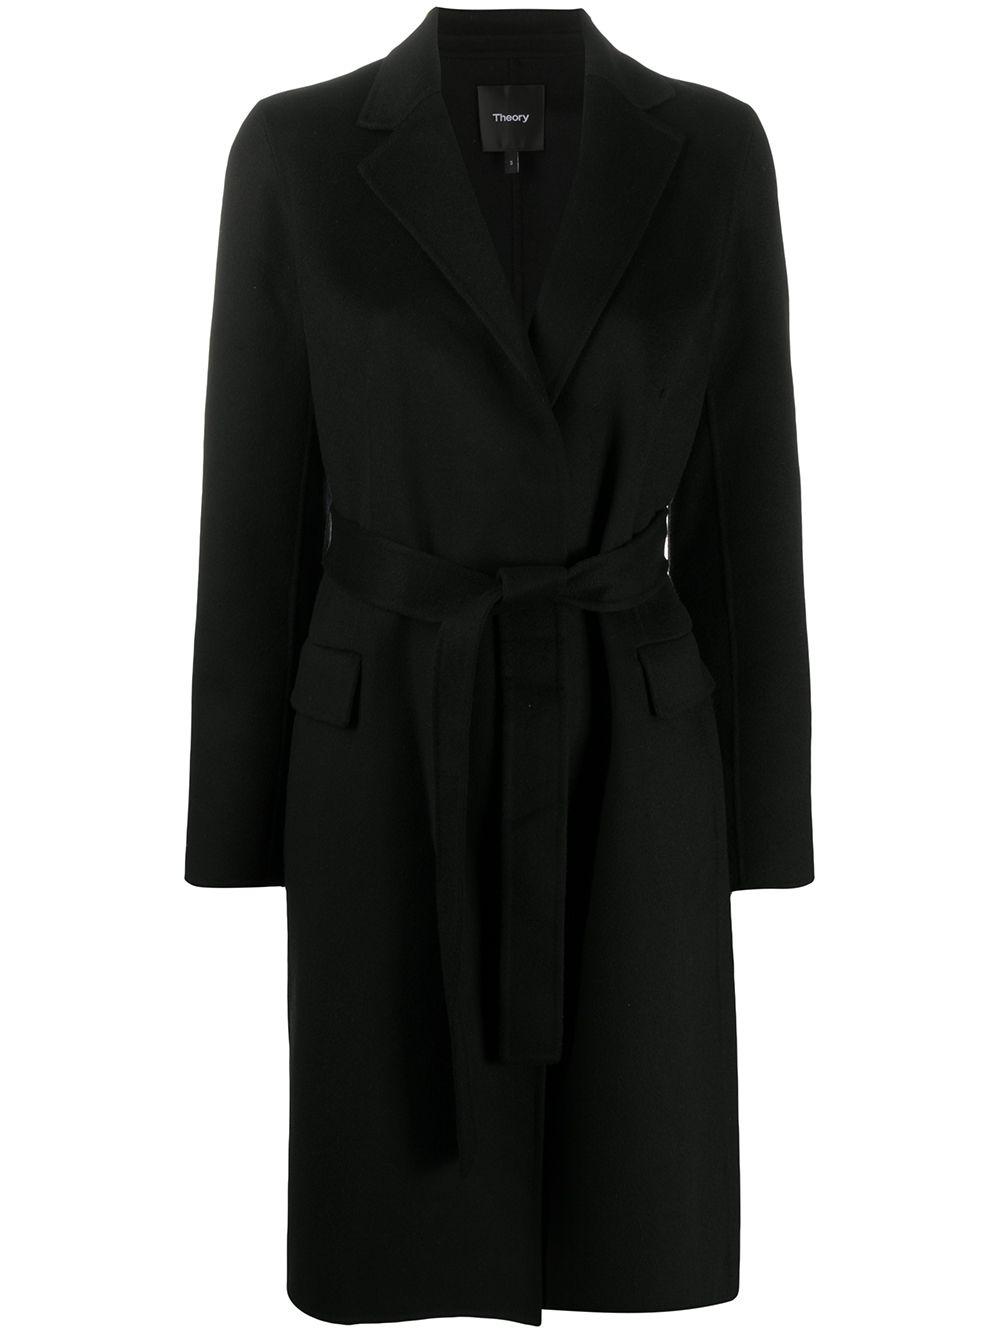 Theory Cashmere Belted Midi Coat in Black - Lyst